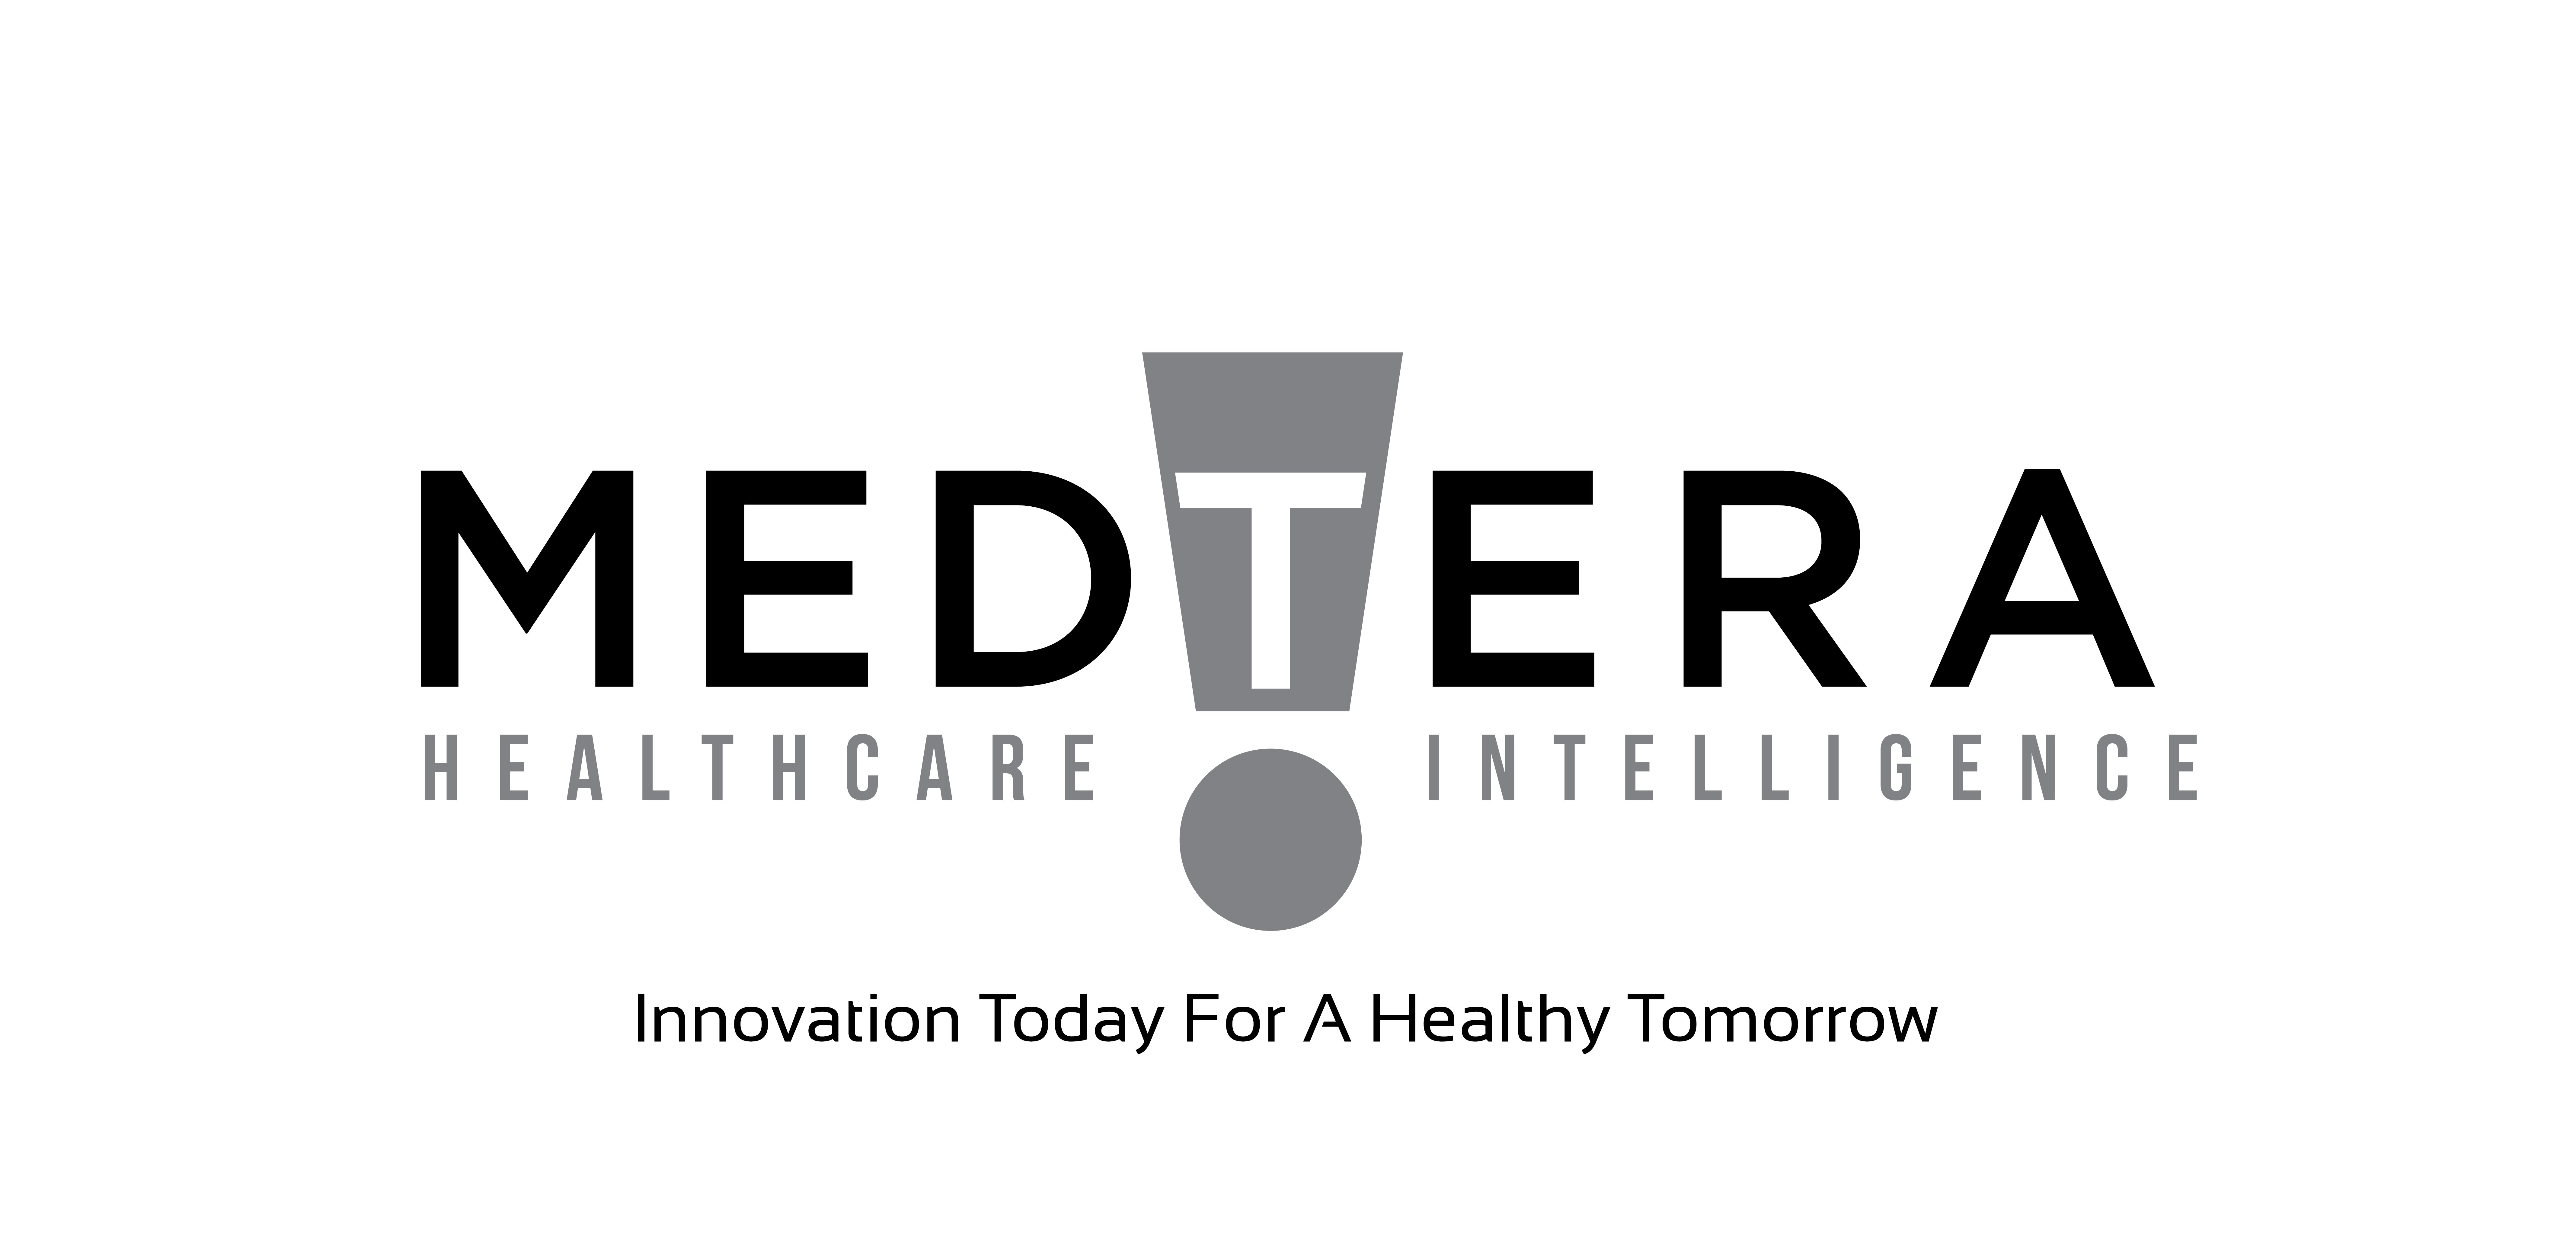  MEDTERA HEALTHCARE INTELLIGENCE INNOVATION TODAY FOR A HEALTHY TOMORROW